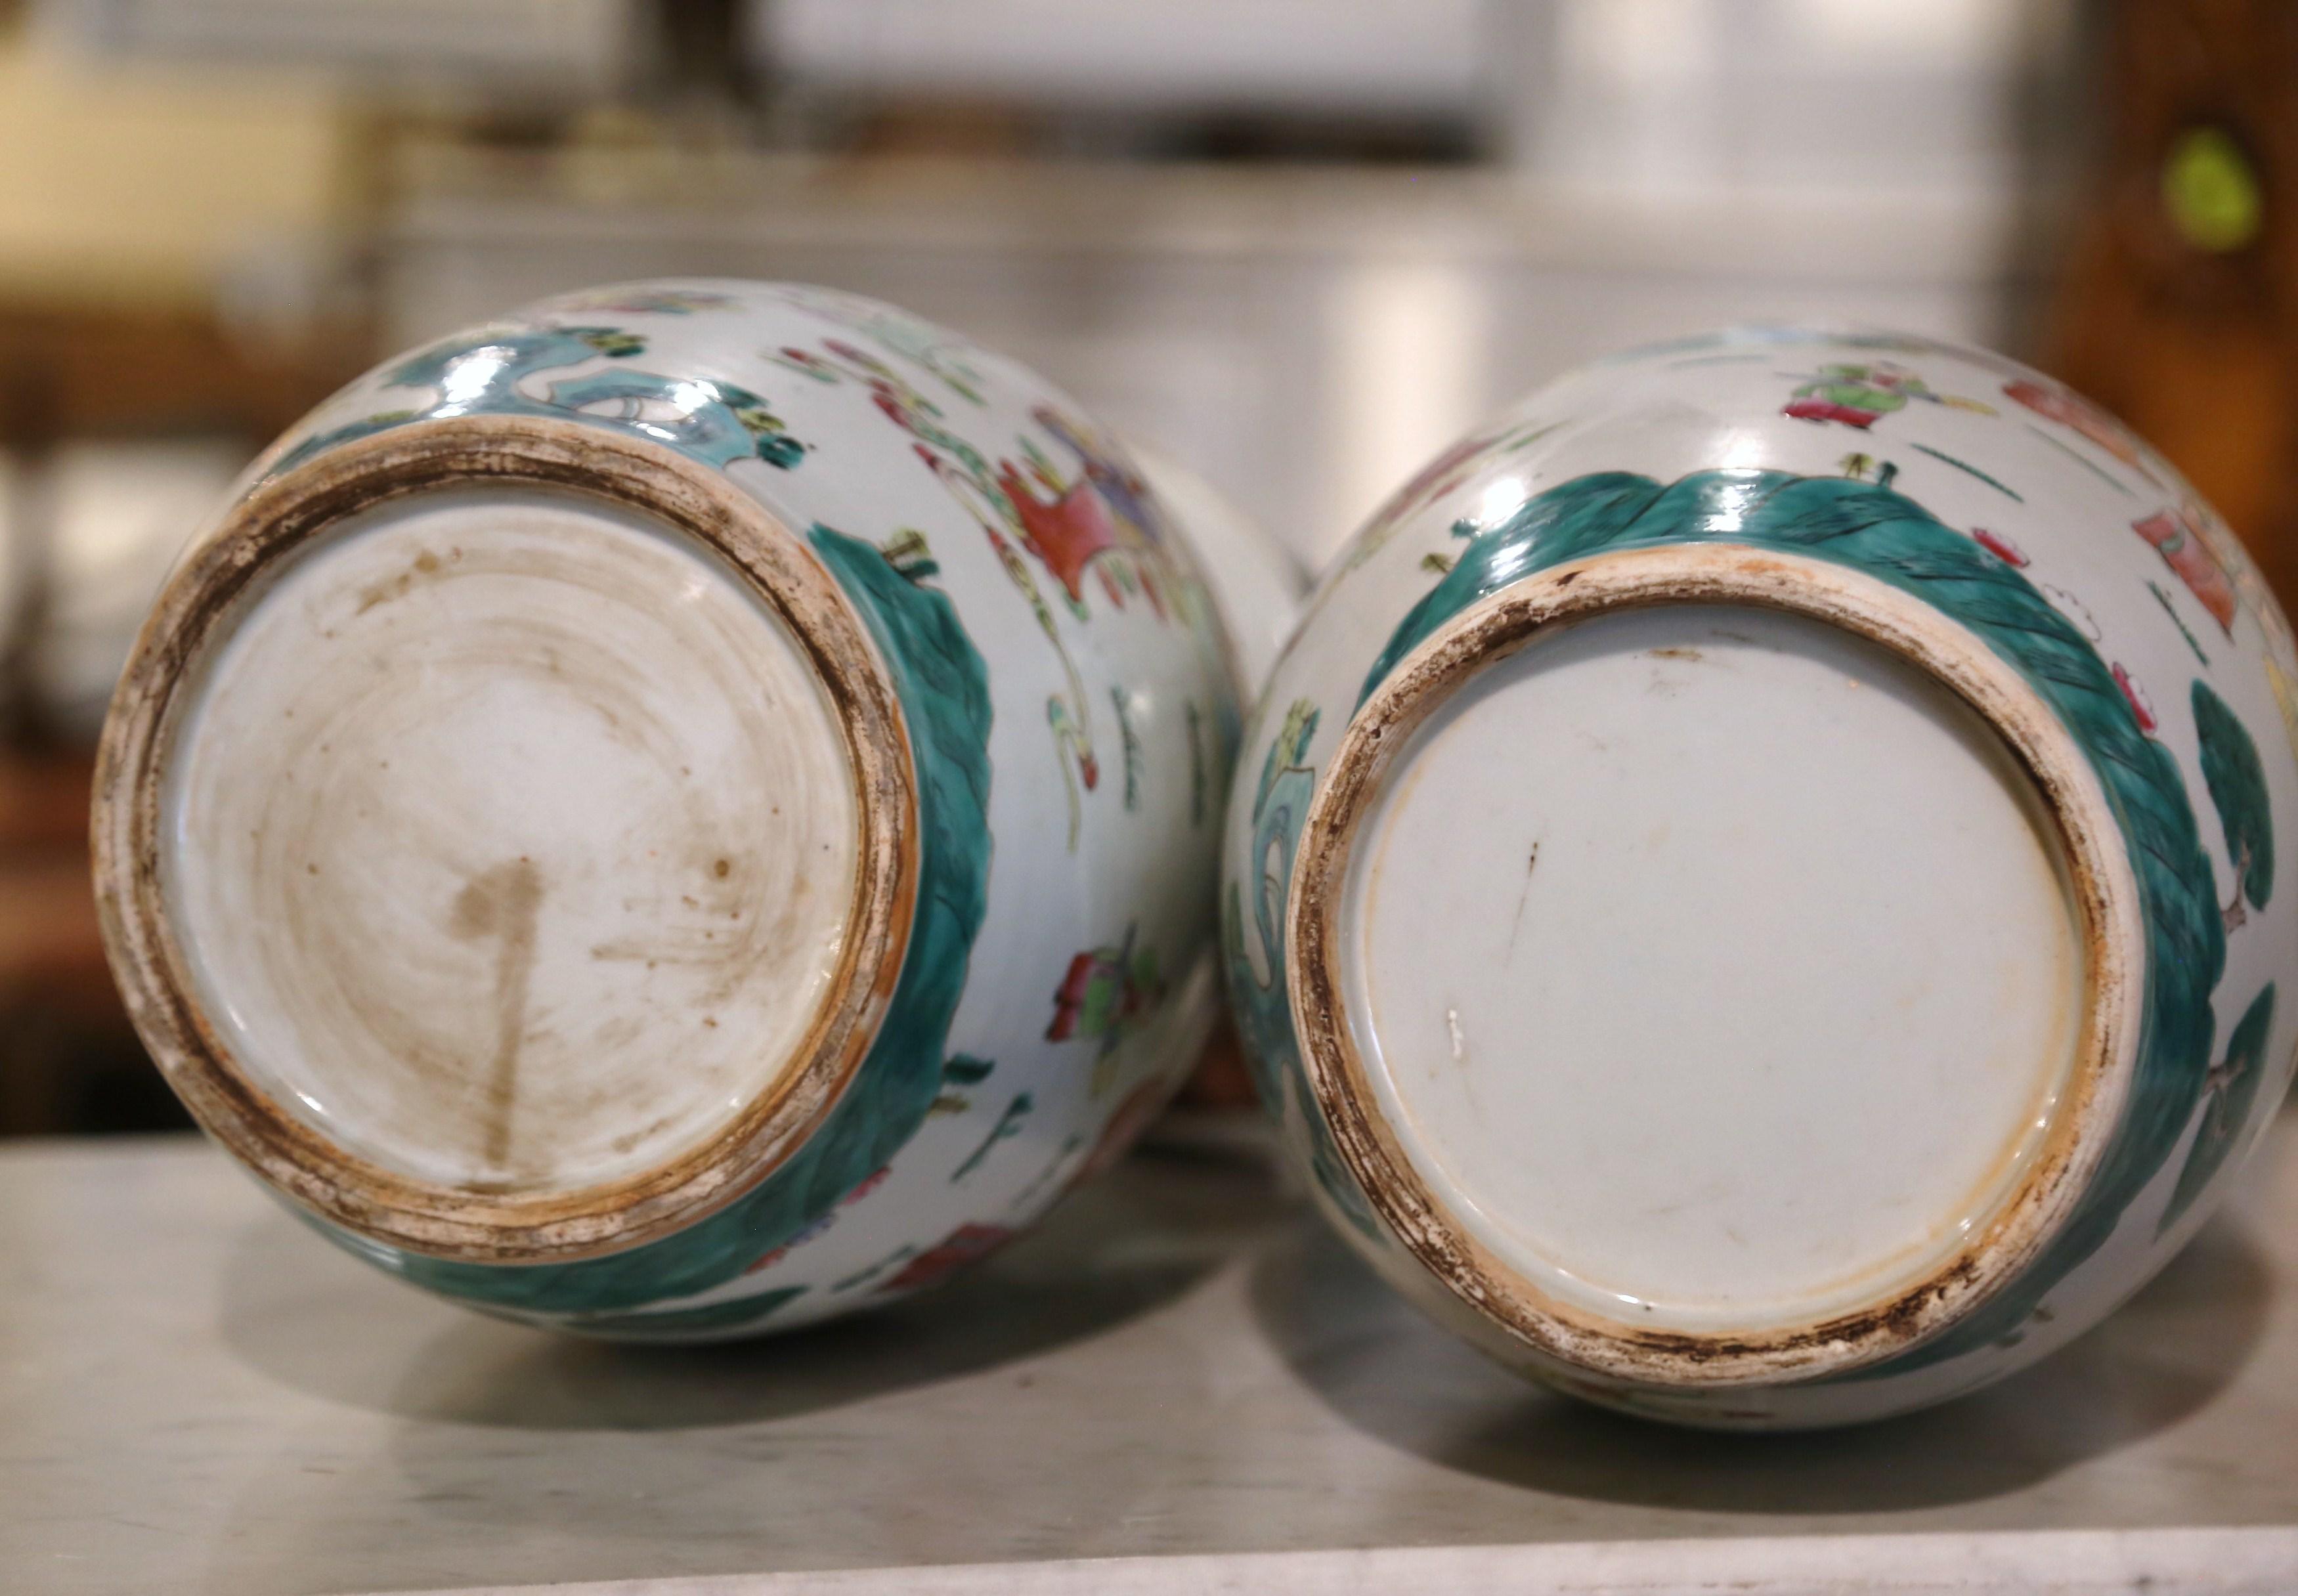 Pair of Mid-Century Chinese Polychrome Porcelain Vases 7